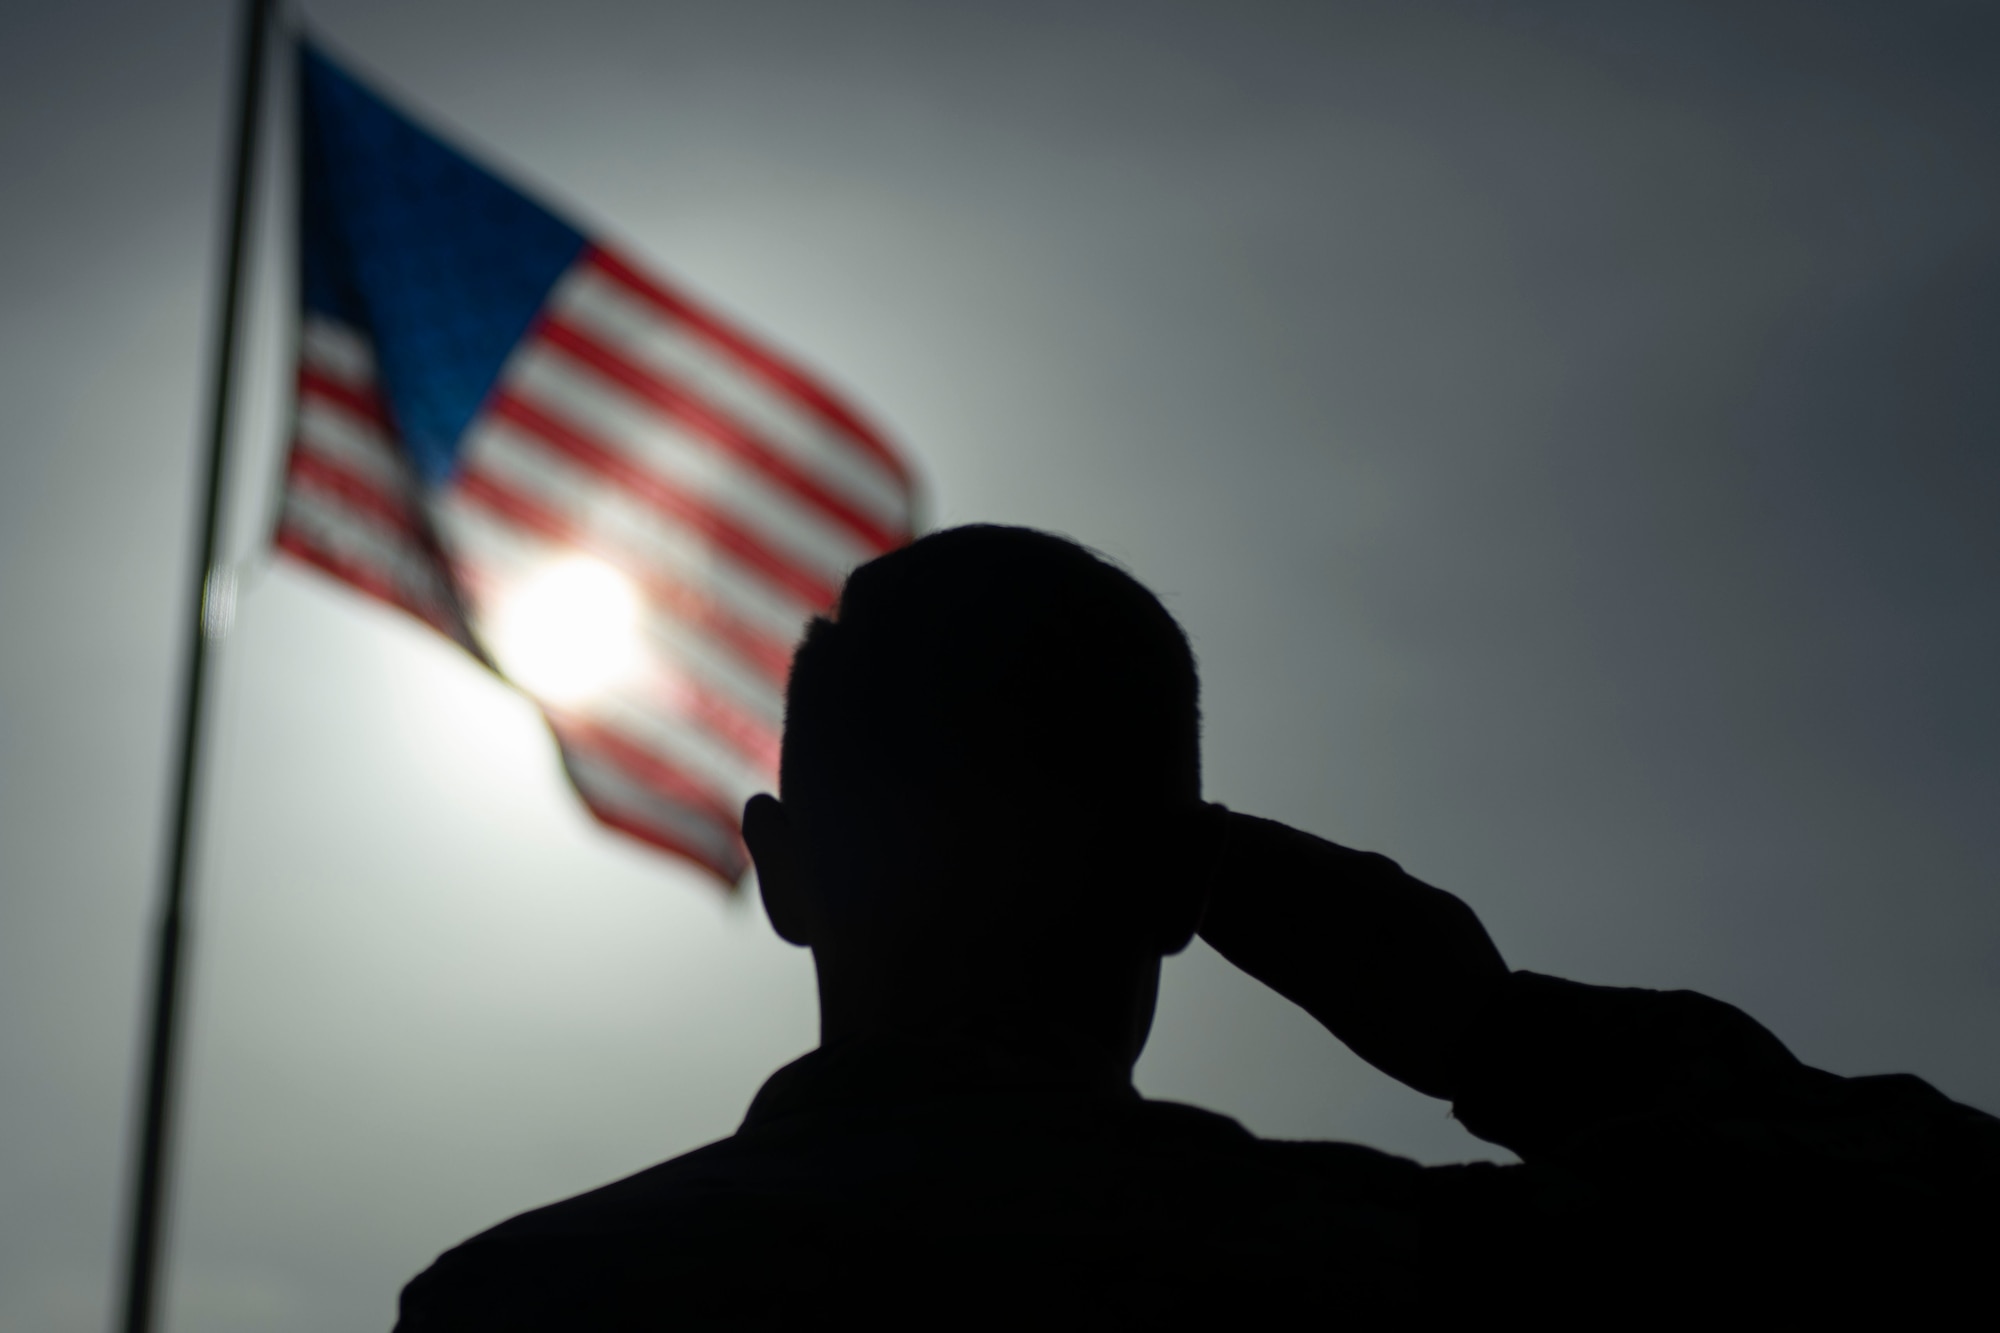 U.S. Air Force Staff Sgt. Devin Boyer, 435th Air Expeditionary Wing photojournalist, salutes the flag at Camp Simba, Kenya, Aug. 26, 2019. The 475th Expeditionary Air Base Squadron raised the flag for the first time since the base operating support-integrator mission started in 2017, signifying the change from tactical to enduring operations. (U.S. Air Force photo by Staff Sgt. Lexie West)